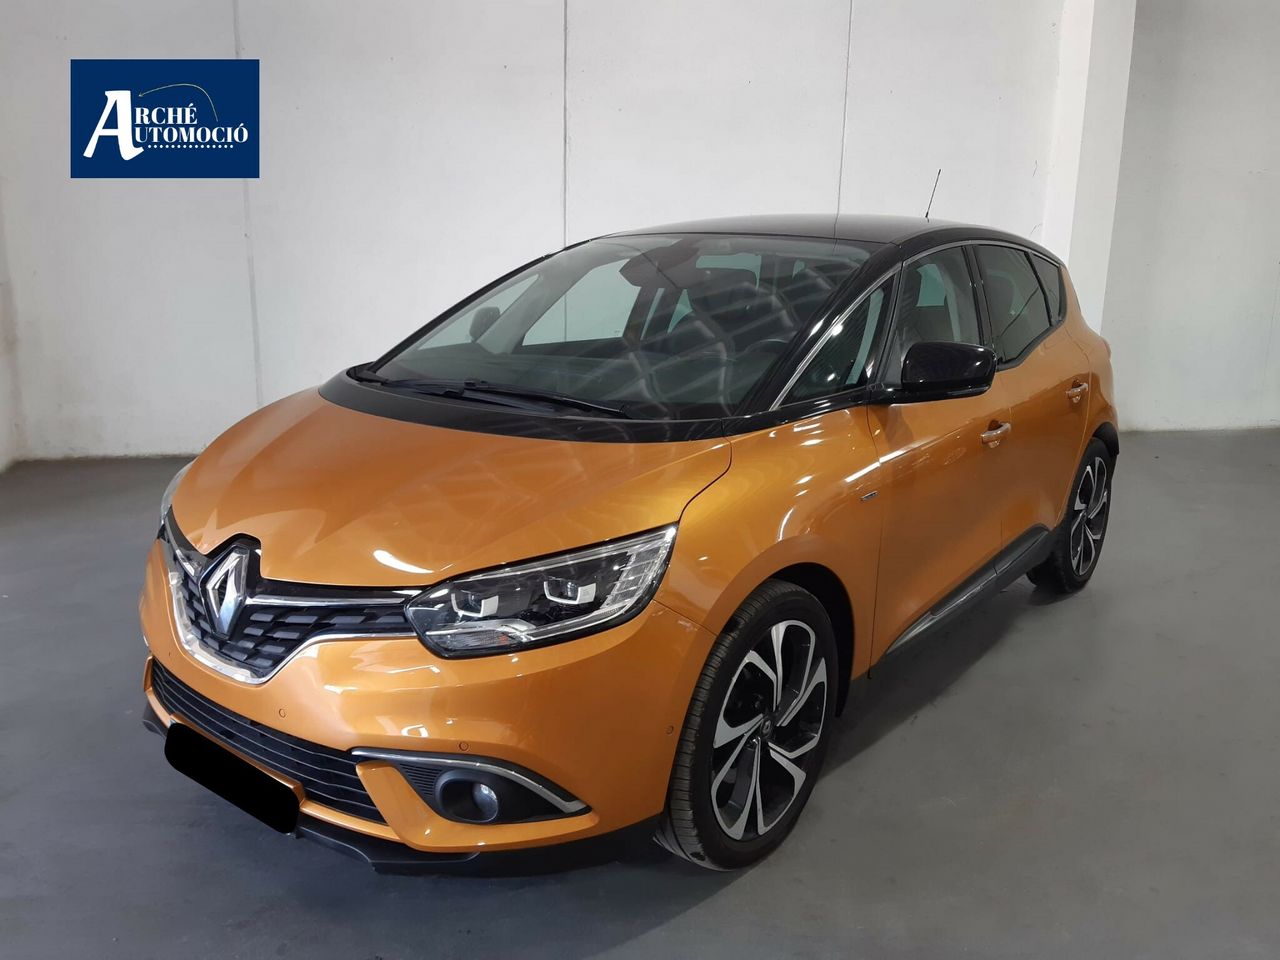 Renault Scénic Edition One  - Foto 1